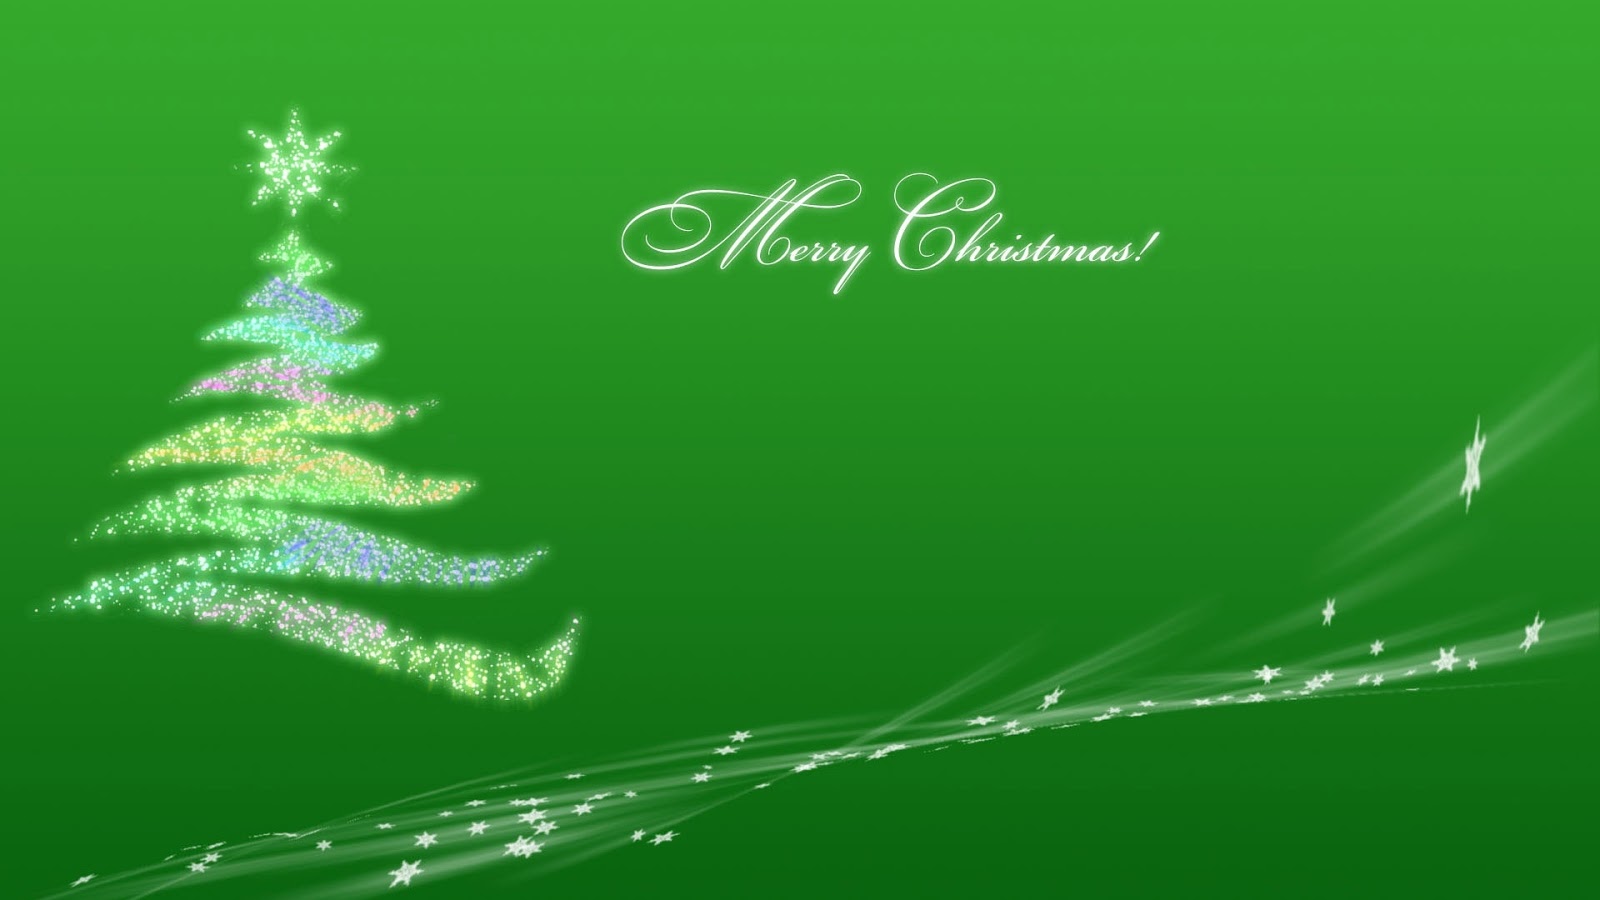 Free High Definition Wallpapers HD Christmas Wallpaper Free Download